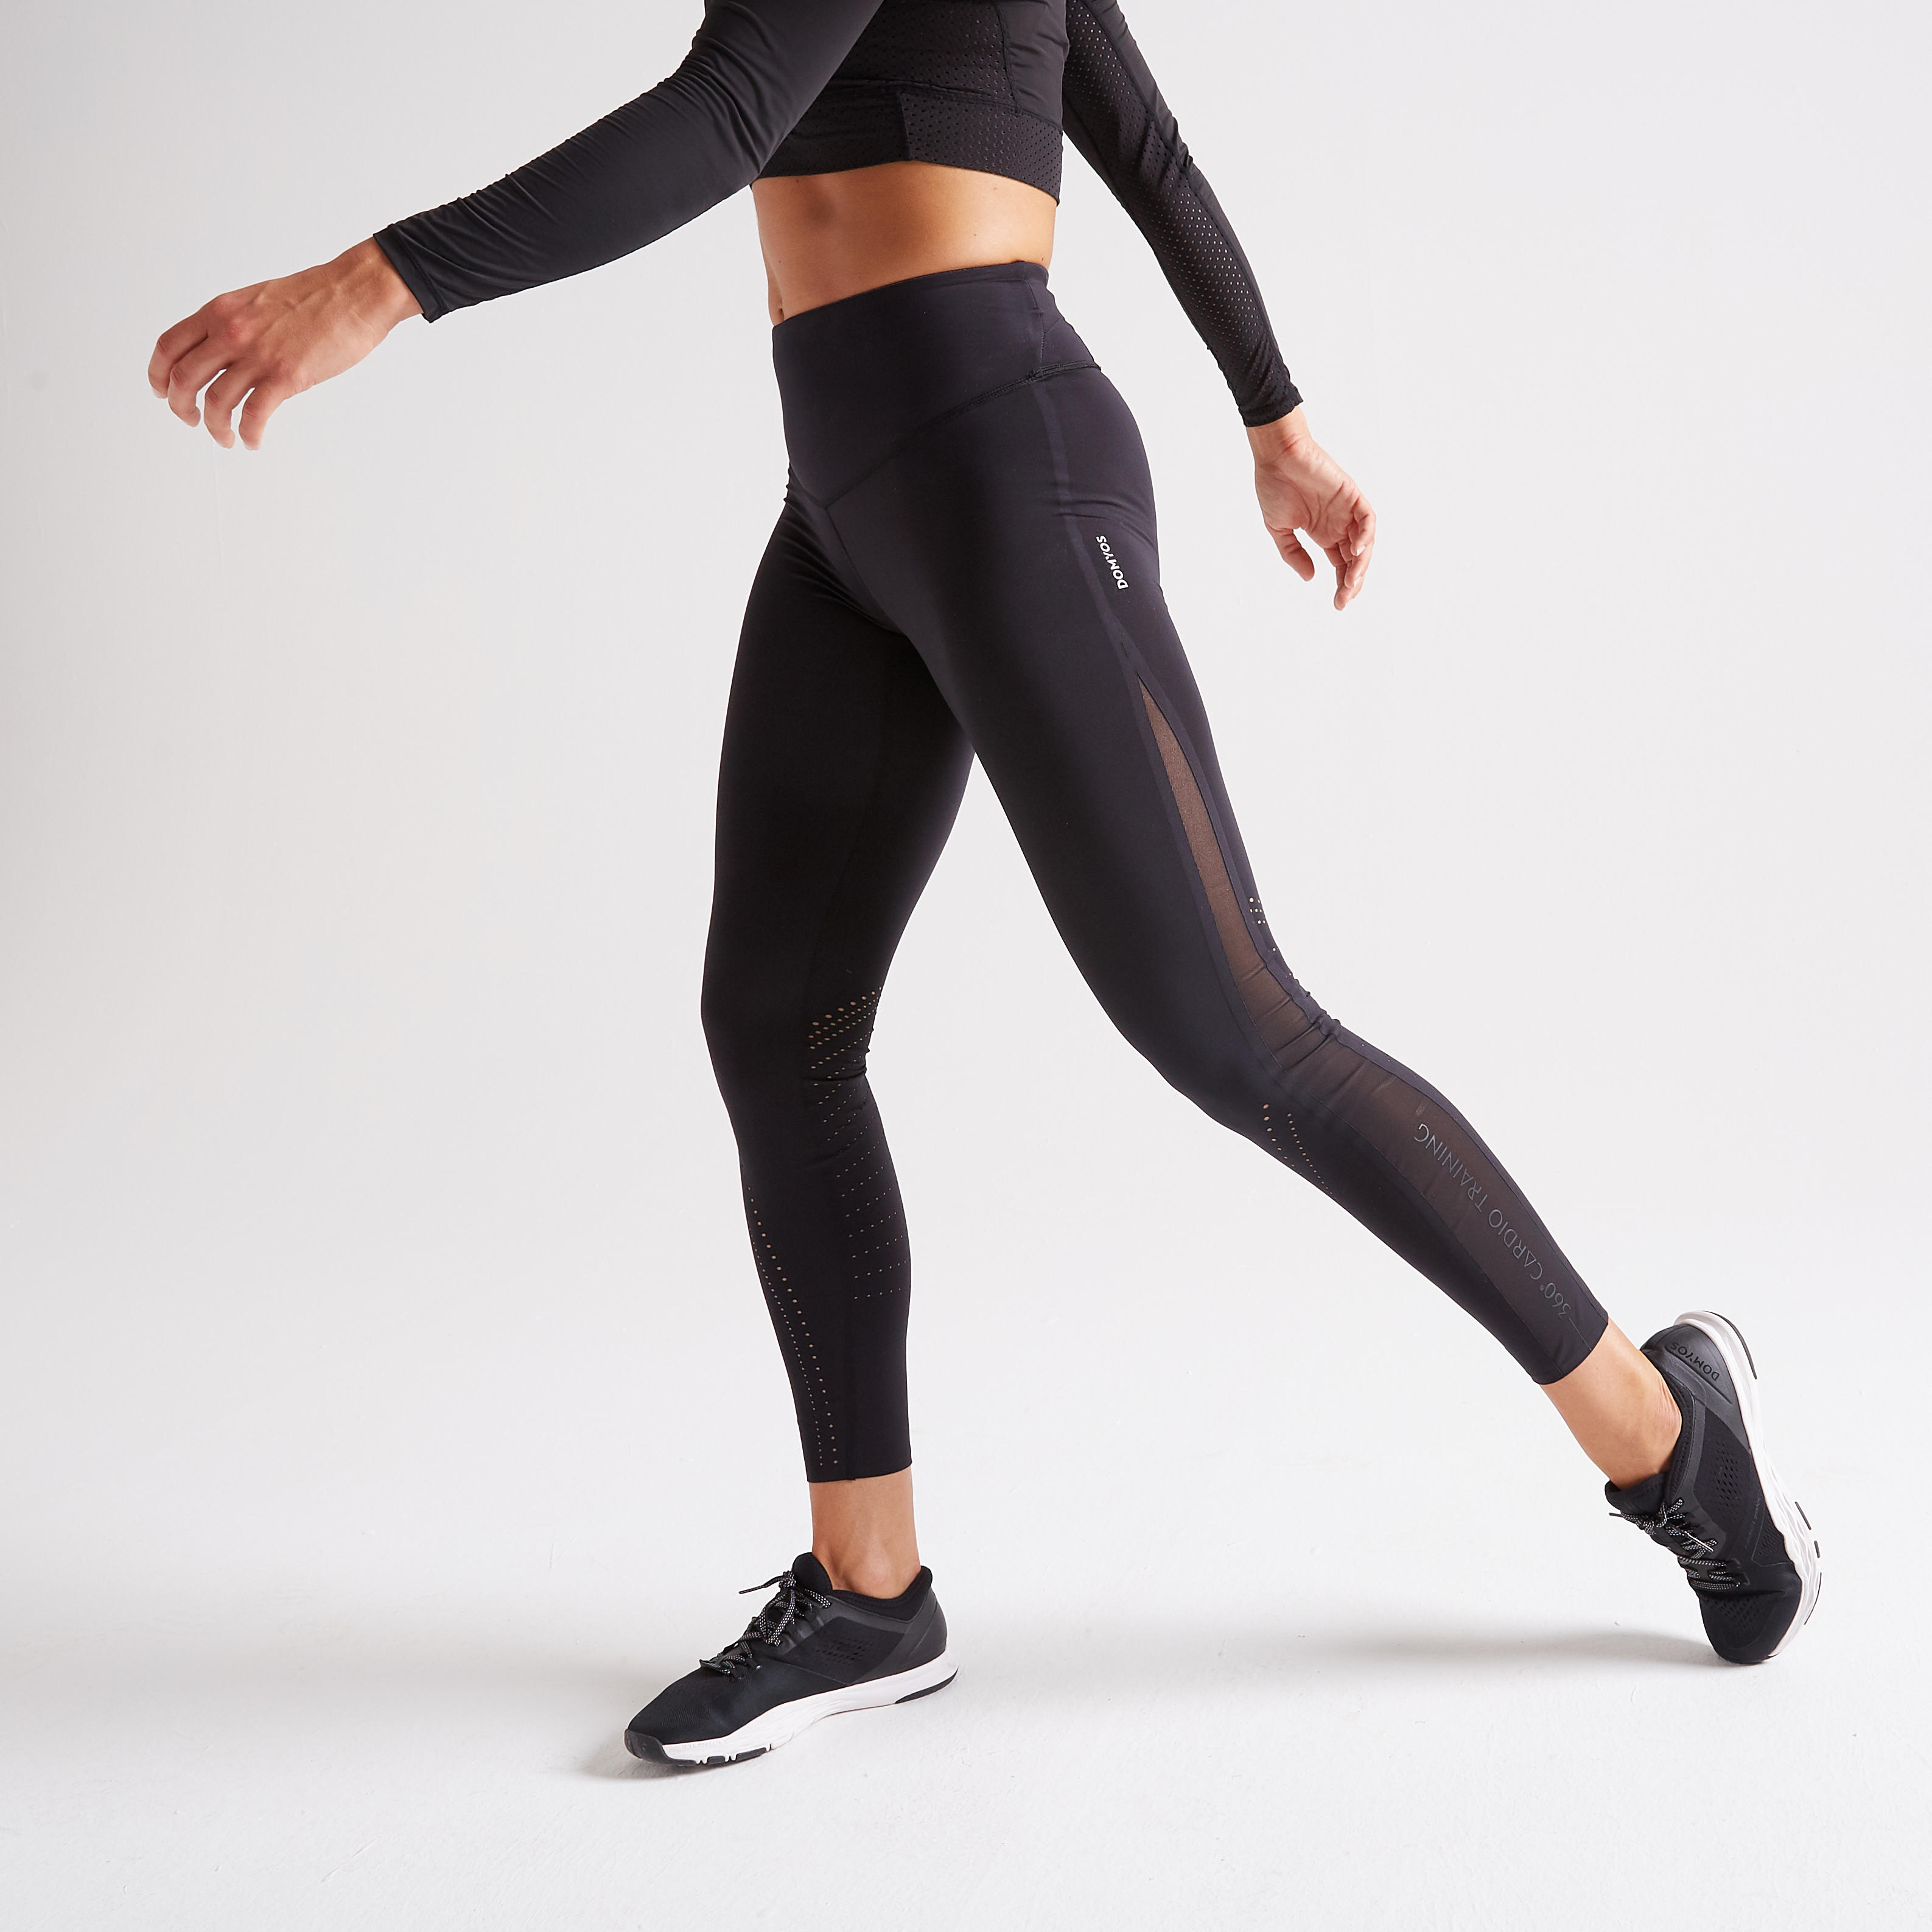 Decathlon Greece - New collection of fitness leggings, aimed at